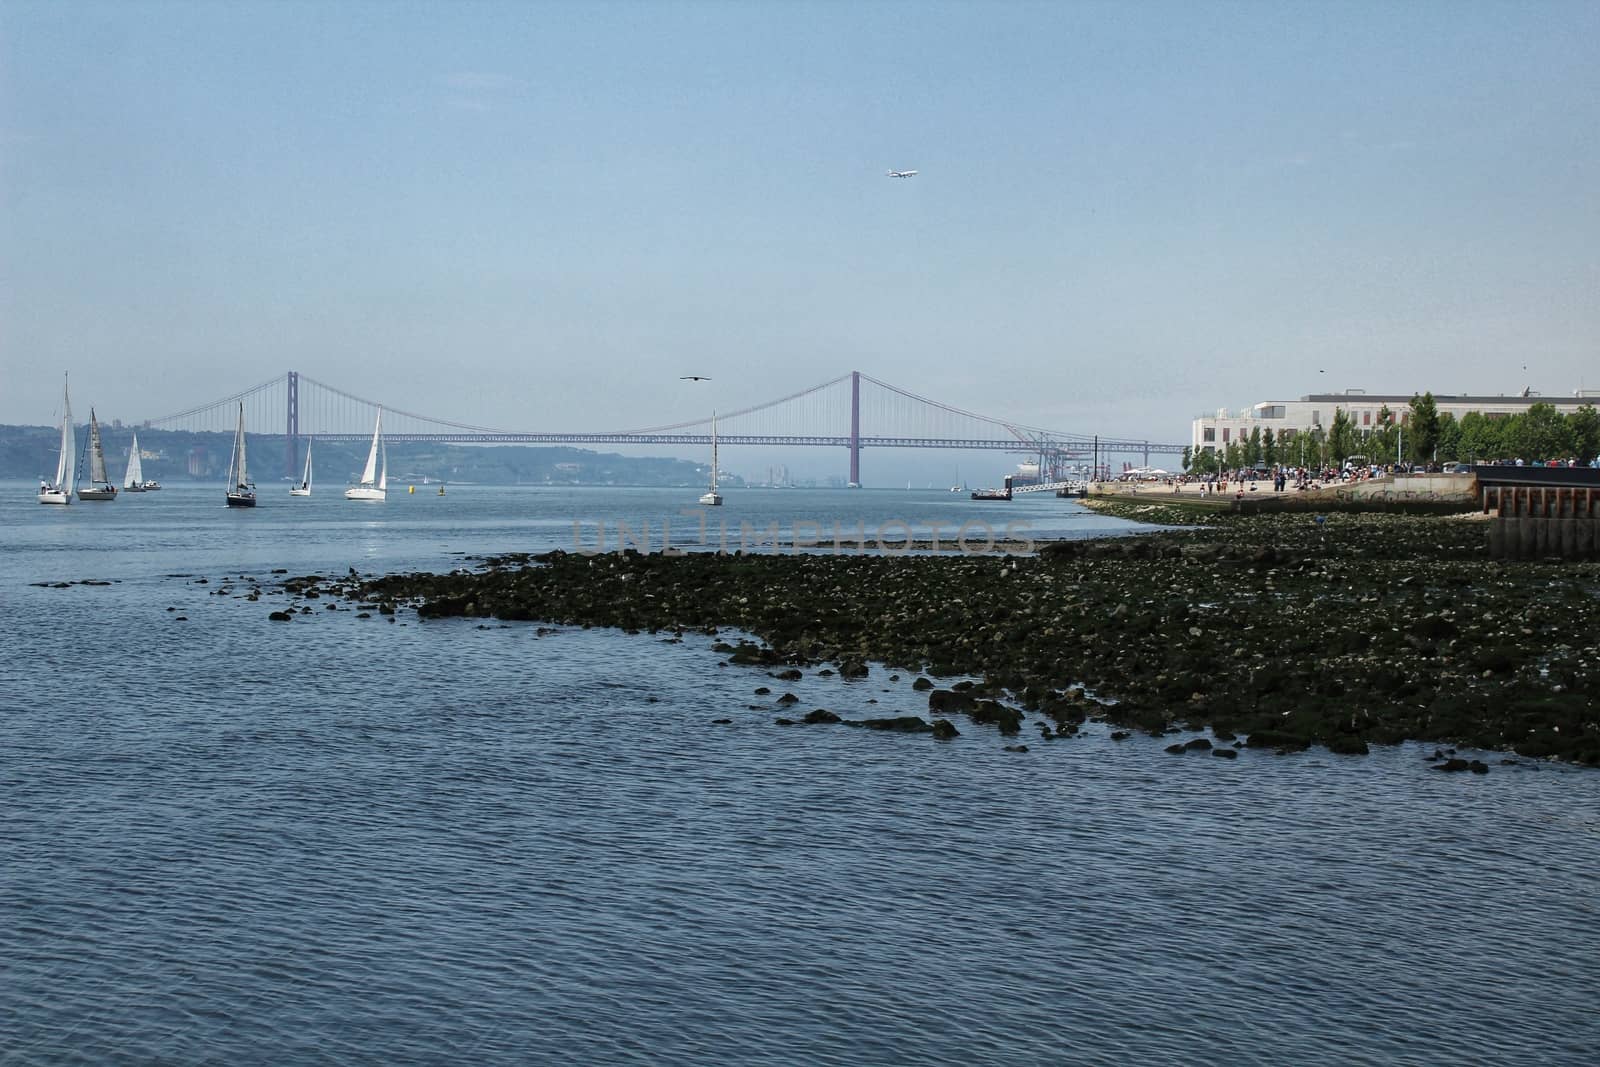 Sailing along the Tagus river in the afternoon by soniabonet